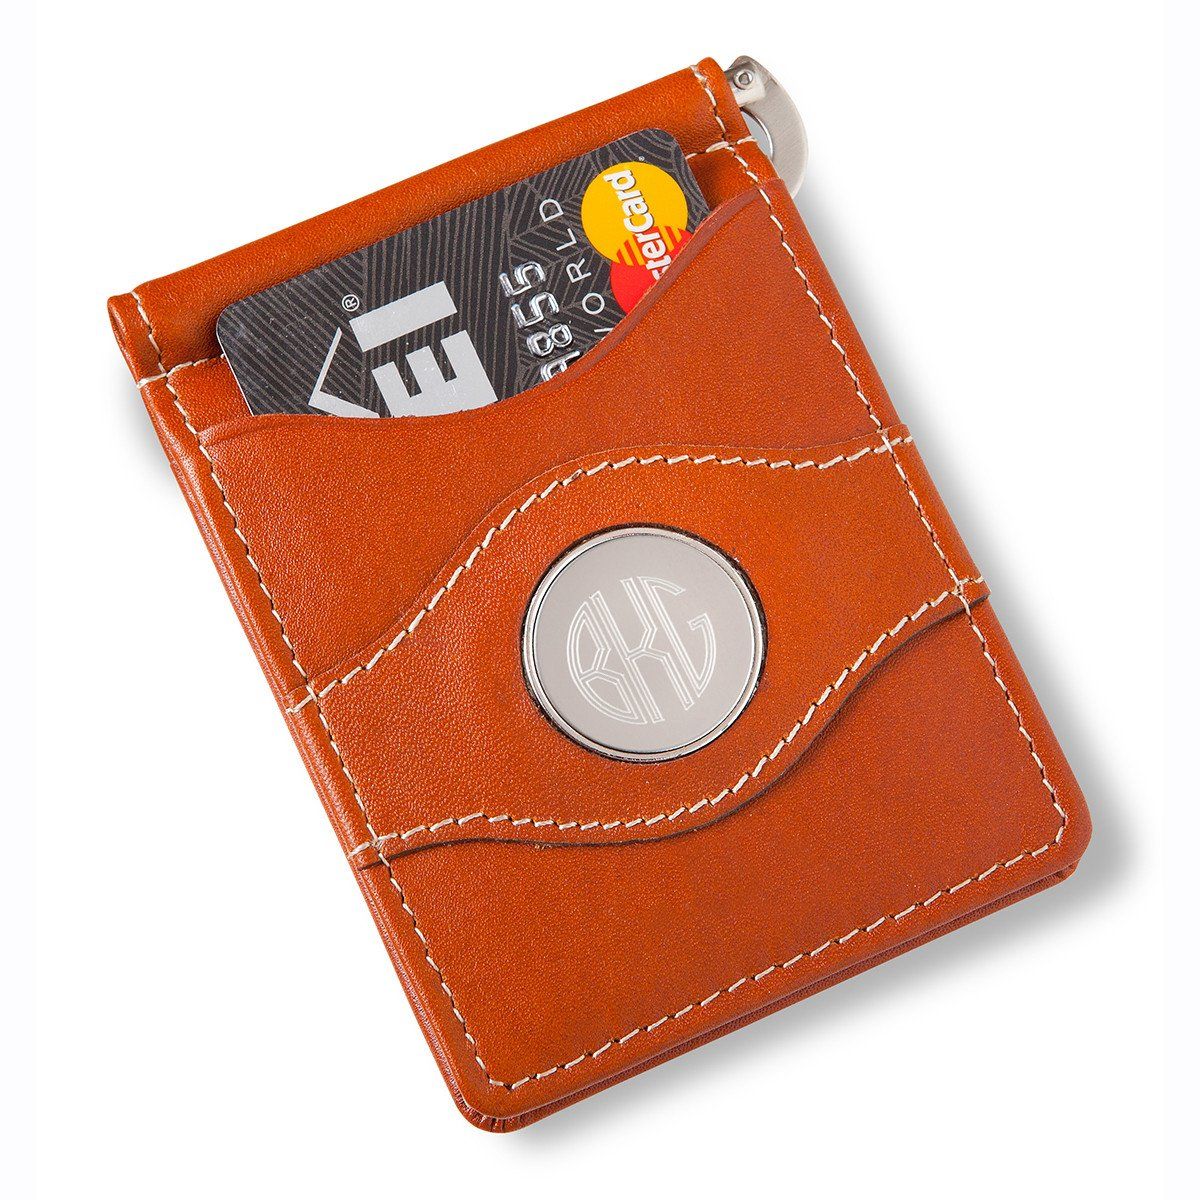 Pin on Wallet